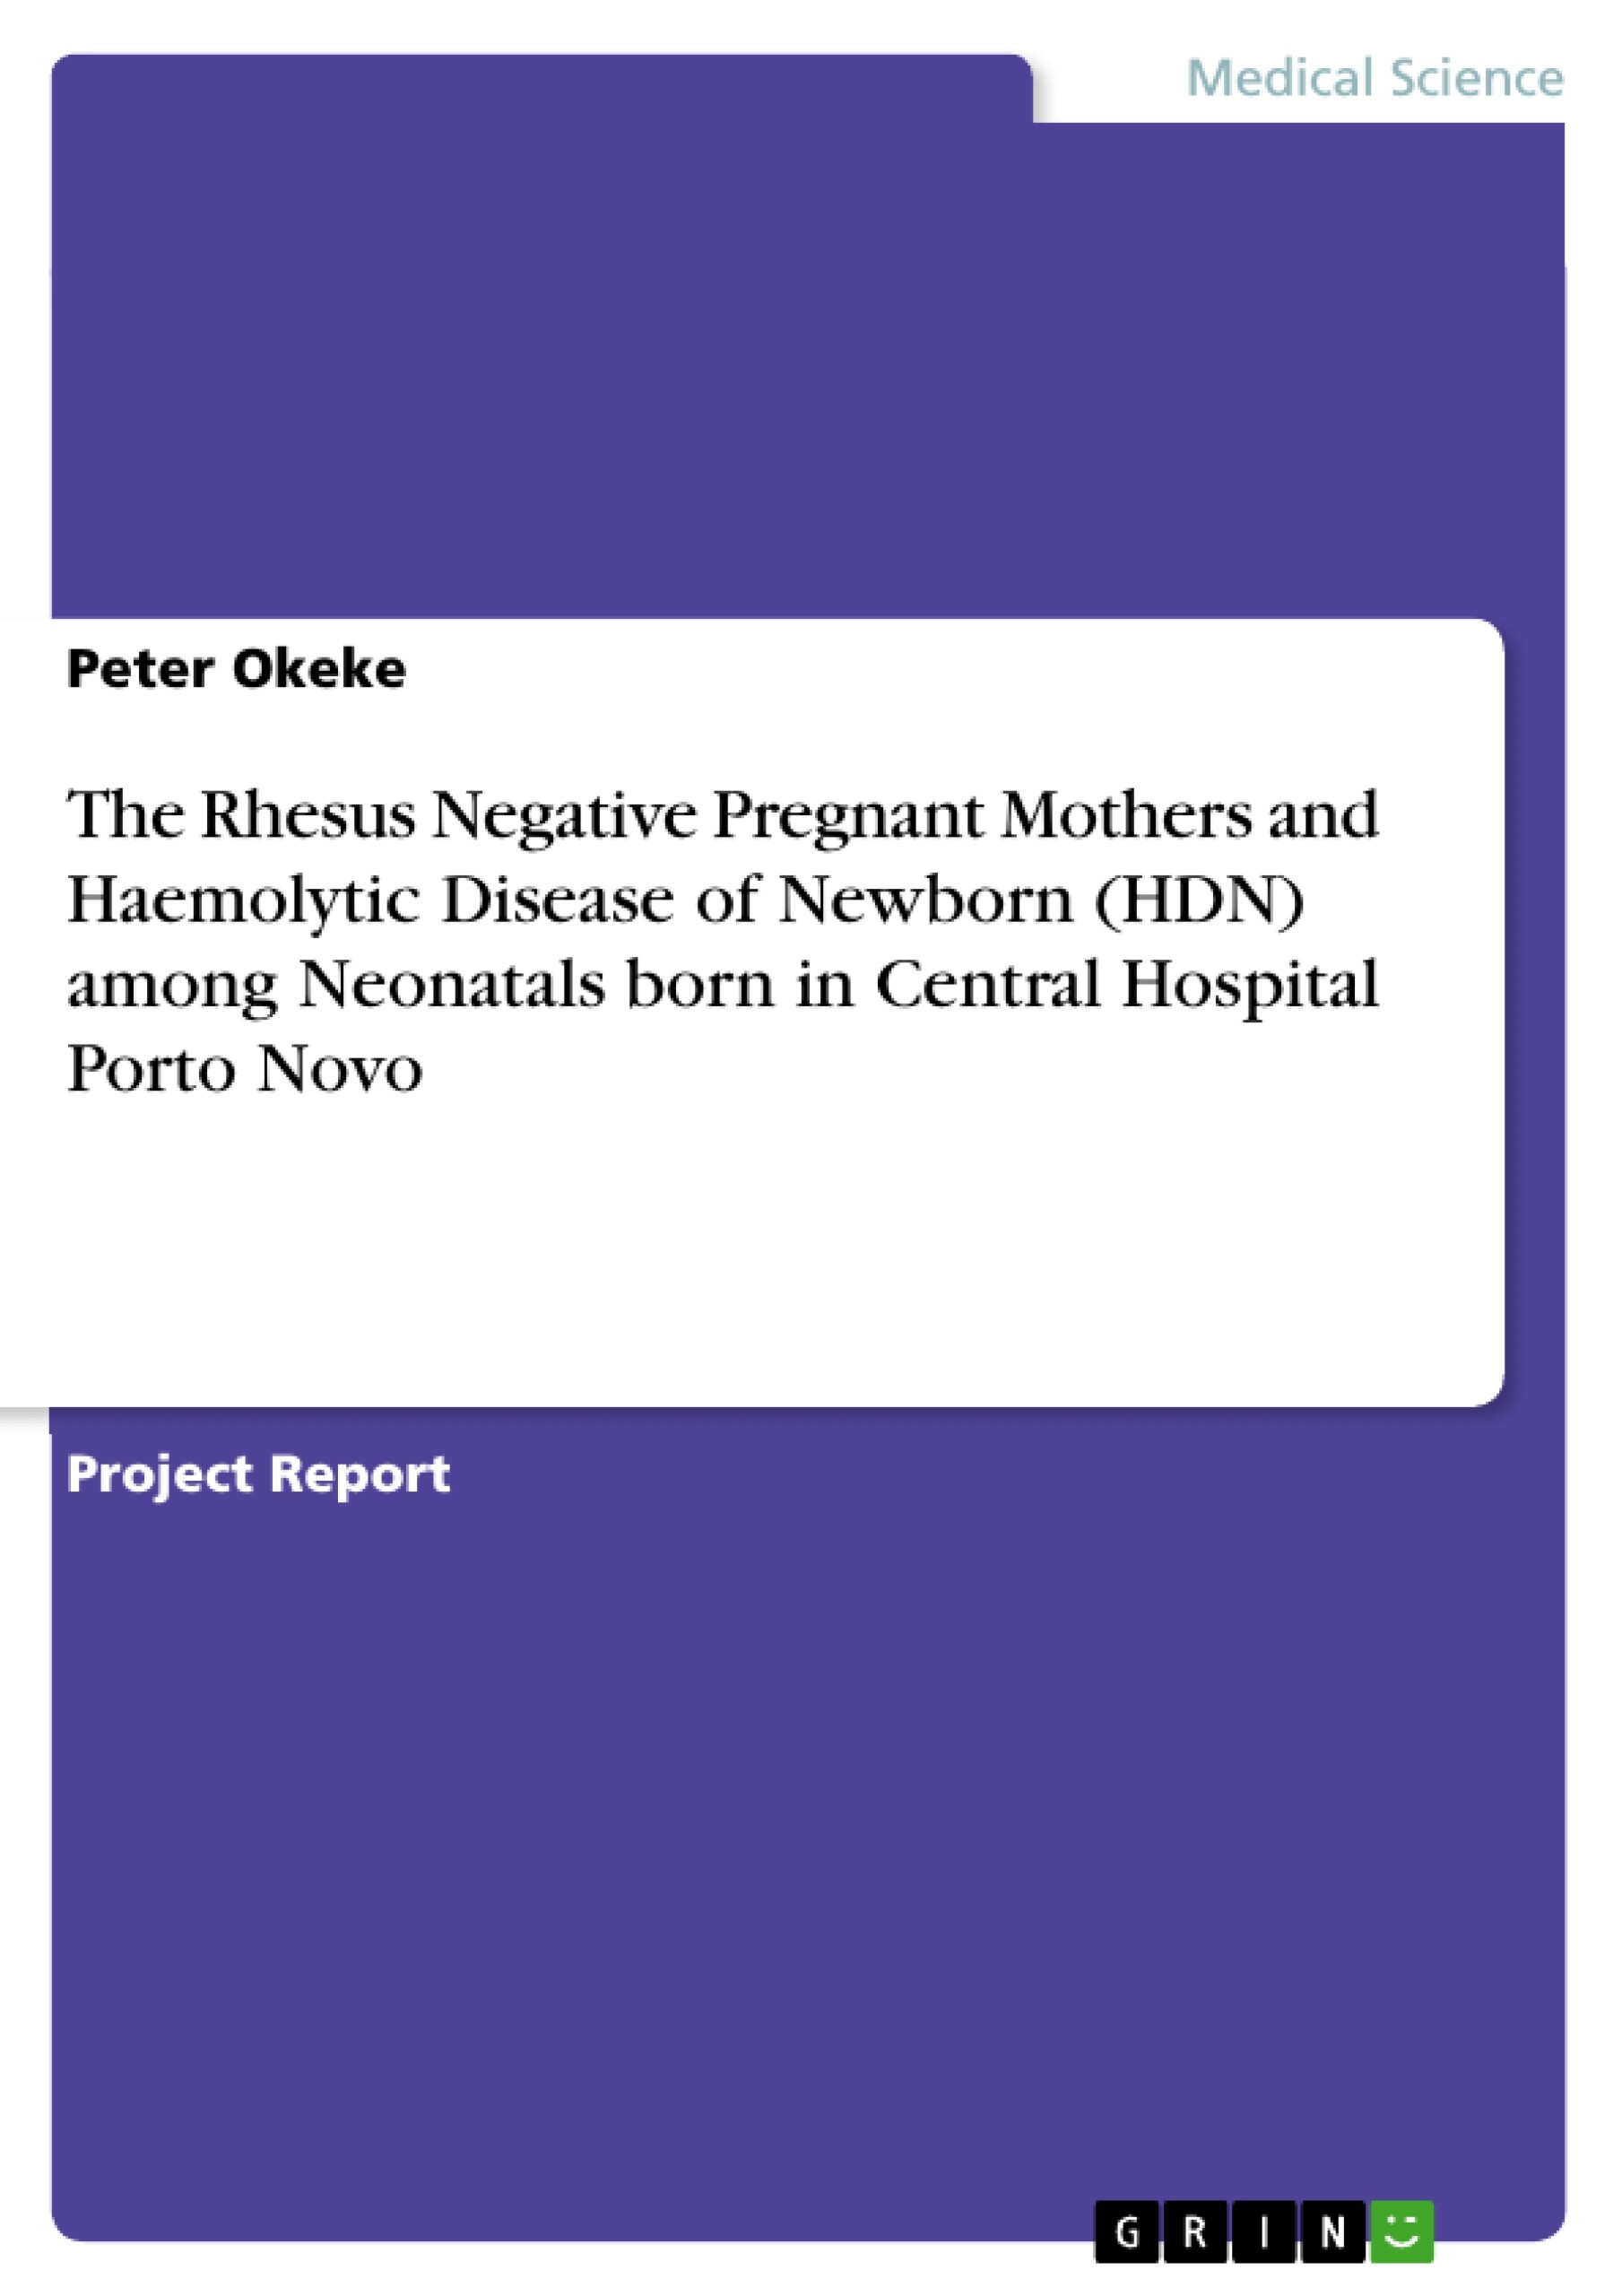 The Rhesus Negative Pregnant Mothers and Haemolytic Disease of Newborn (HDN) among Neonatals born in Central Hospital Porto Novo